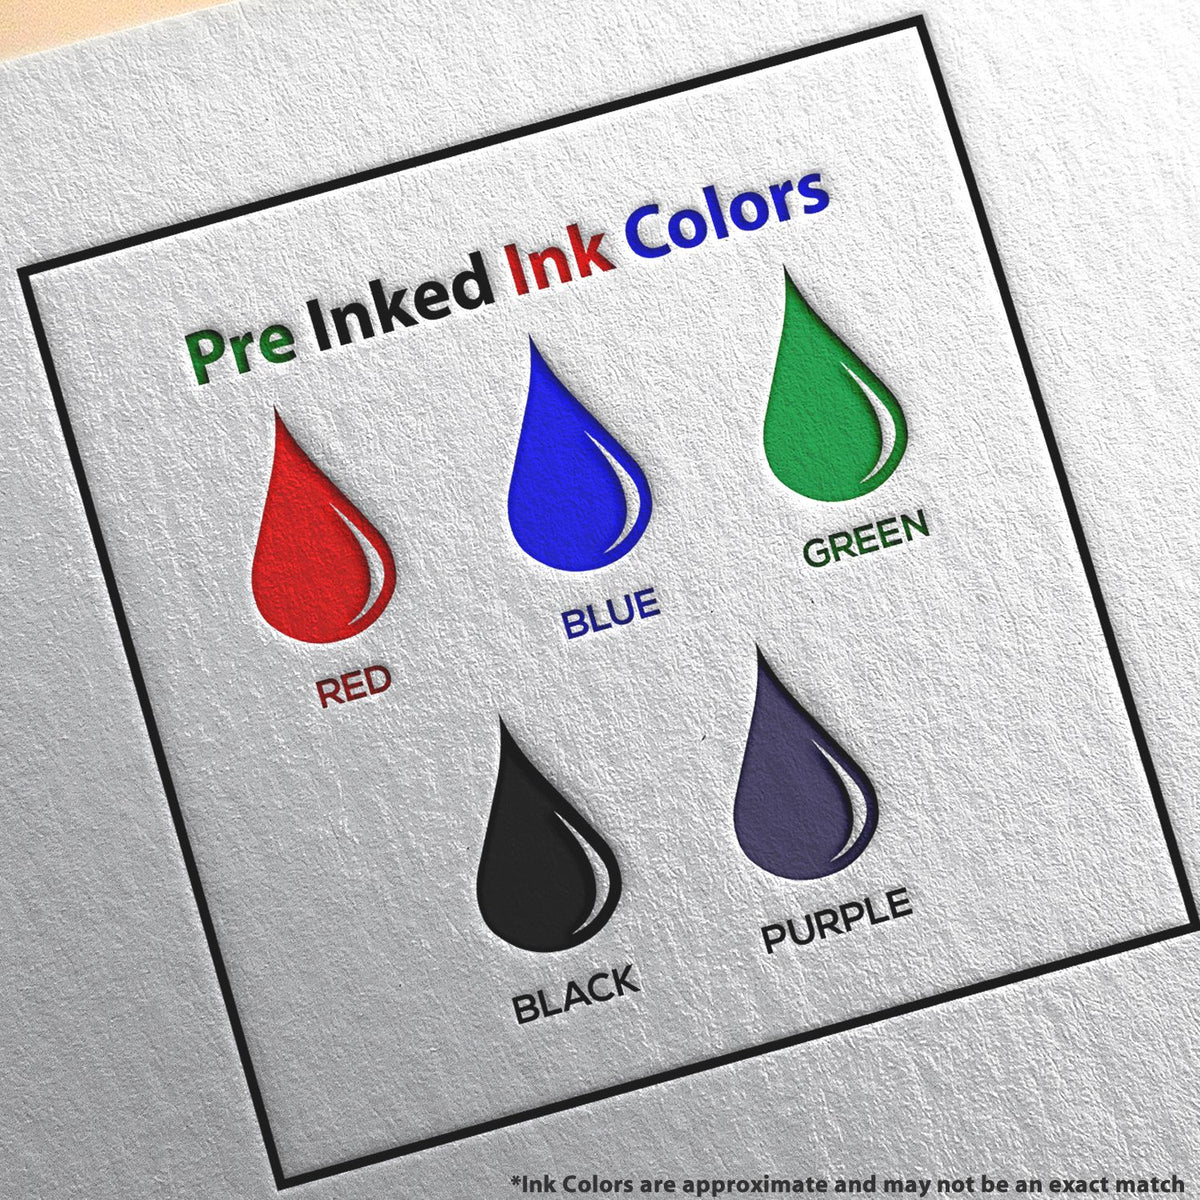 A picture showing the different ink colors or hues available for the Slim Pre-Inked Utah Professional Engineer Seal Stamp product.